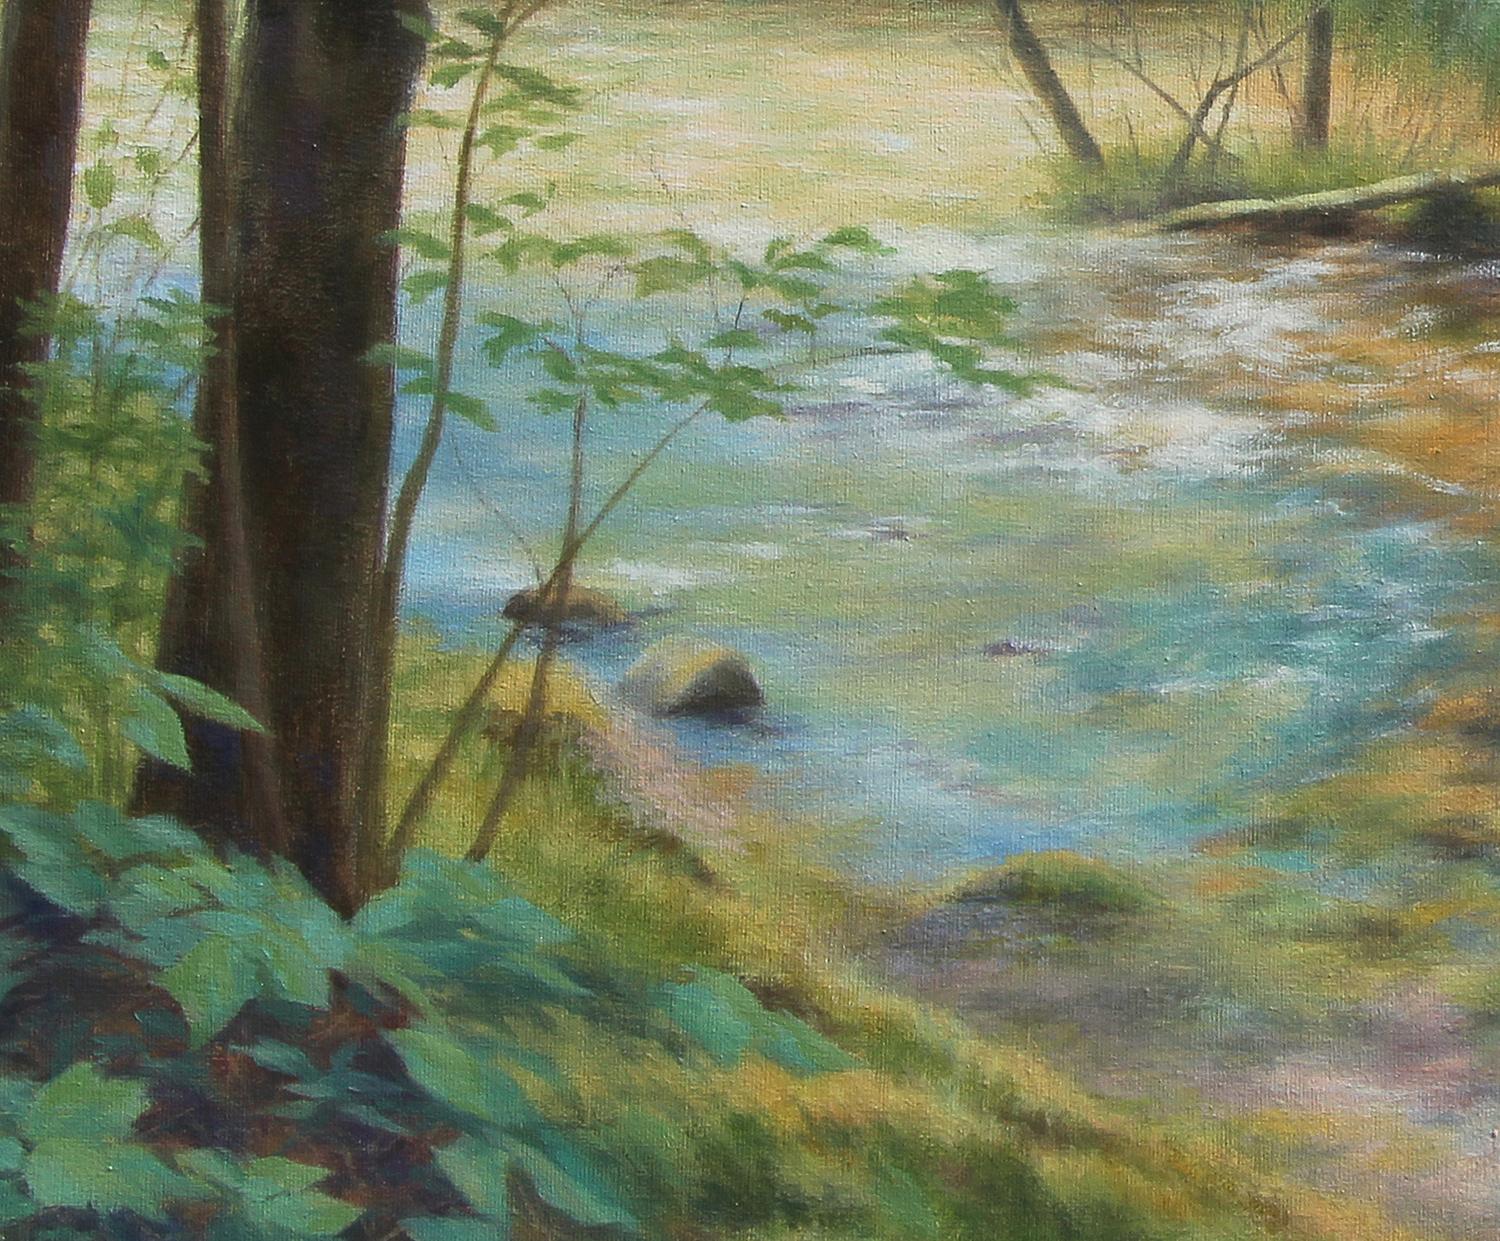 <p>Artist Comments<br />While on a summer hike in the woods, Jo discovered this stream and small pool of water. She says she couldn't resist stopping and dipping her feet in the cool water. 